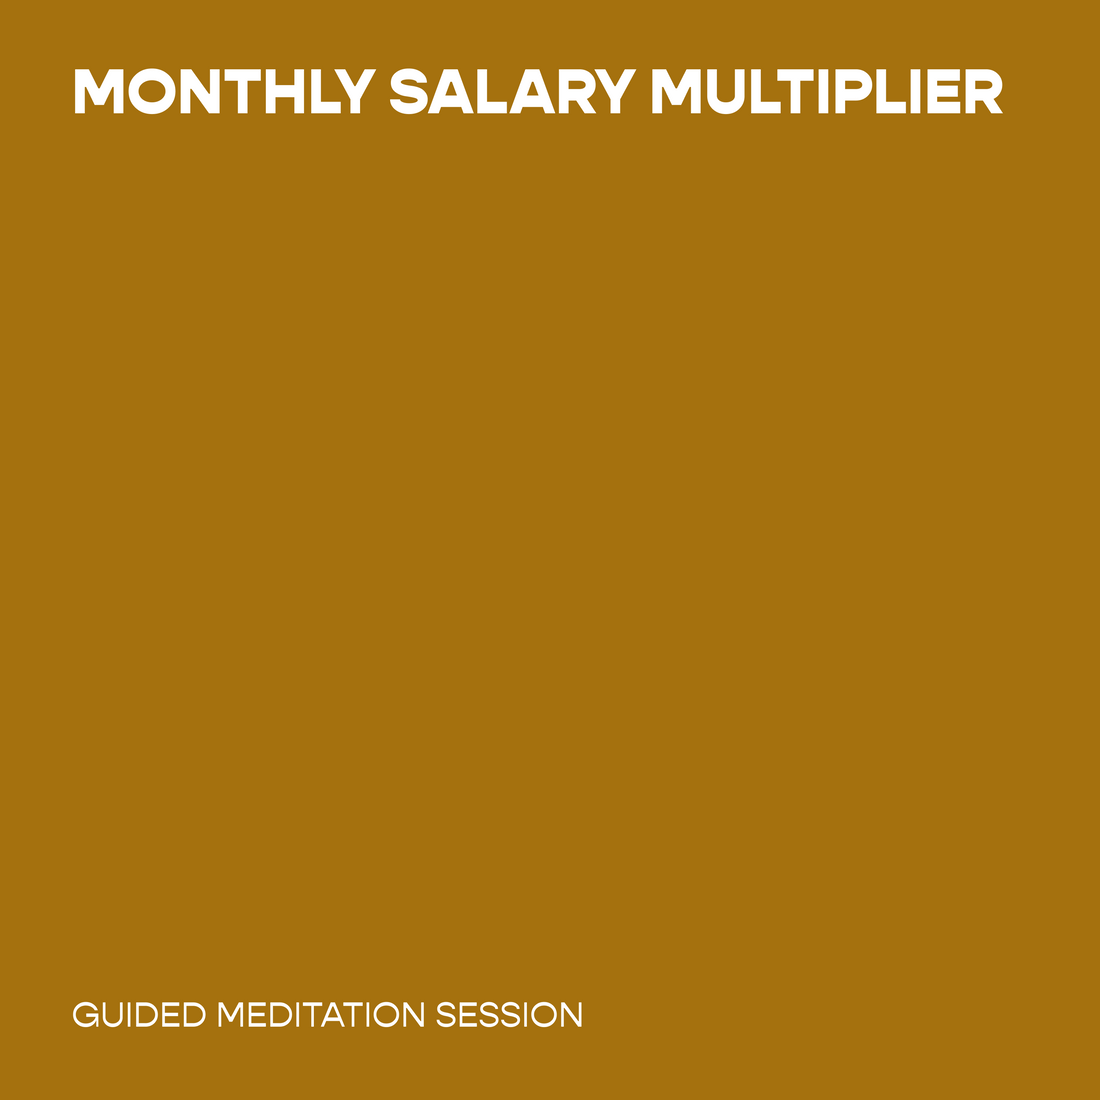 Monthly Salary Multiplier